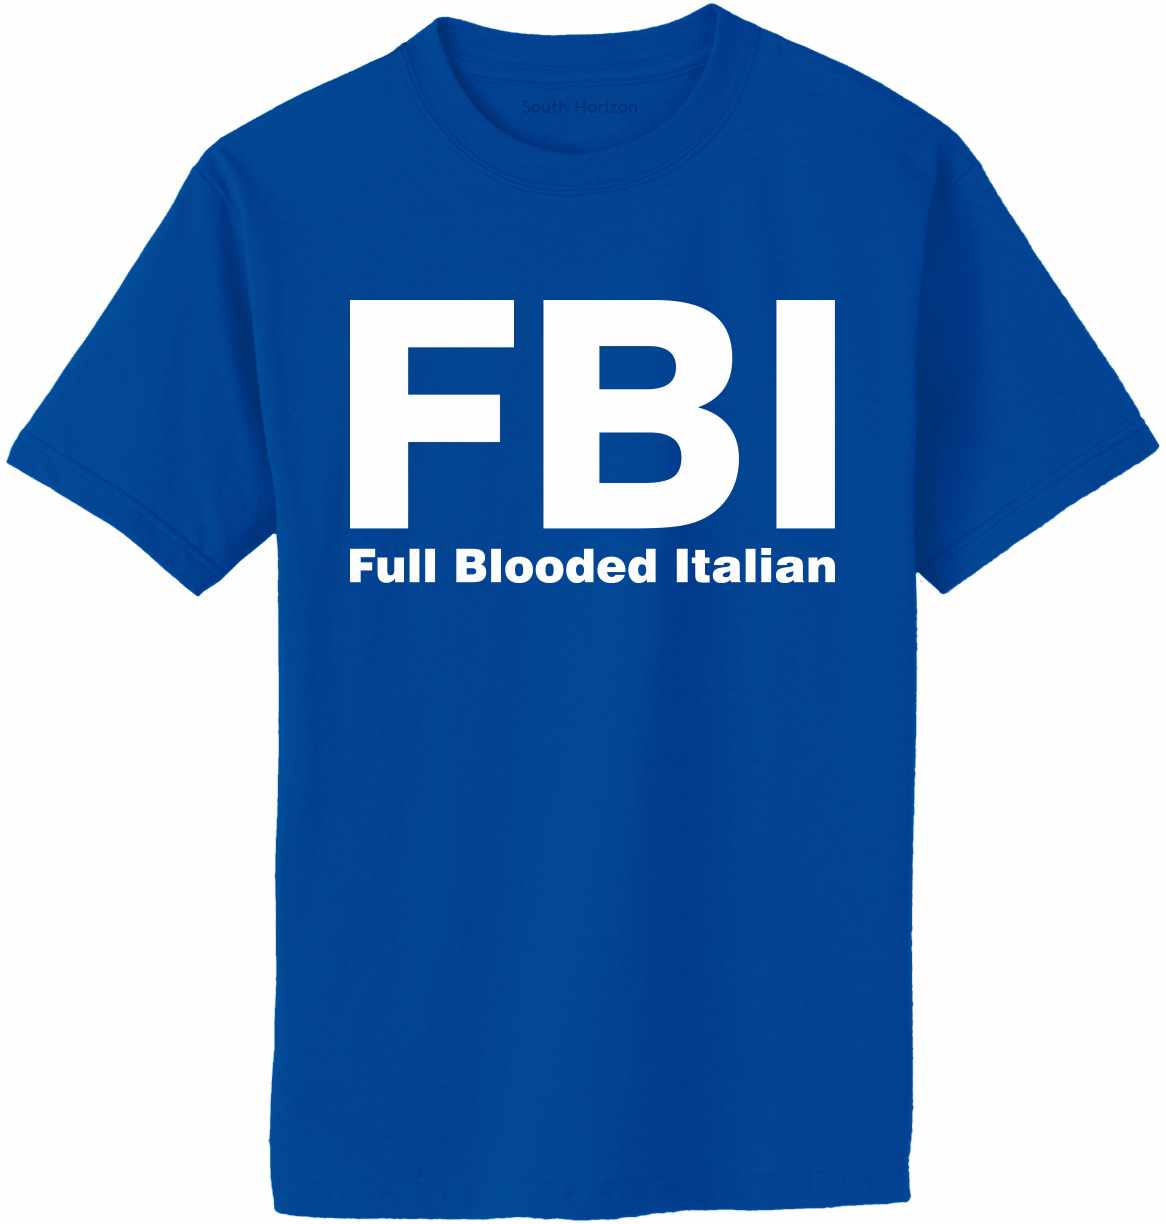 Federal Boobie Inspector on Adult T-Shirt in 13 colors – South Horizon  T-Shirt Company